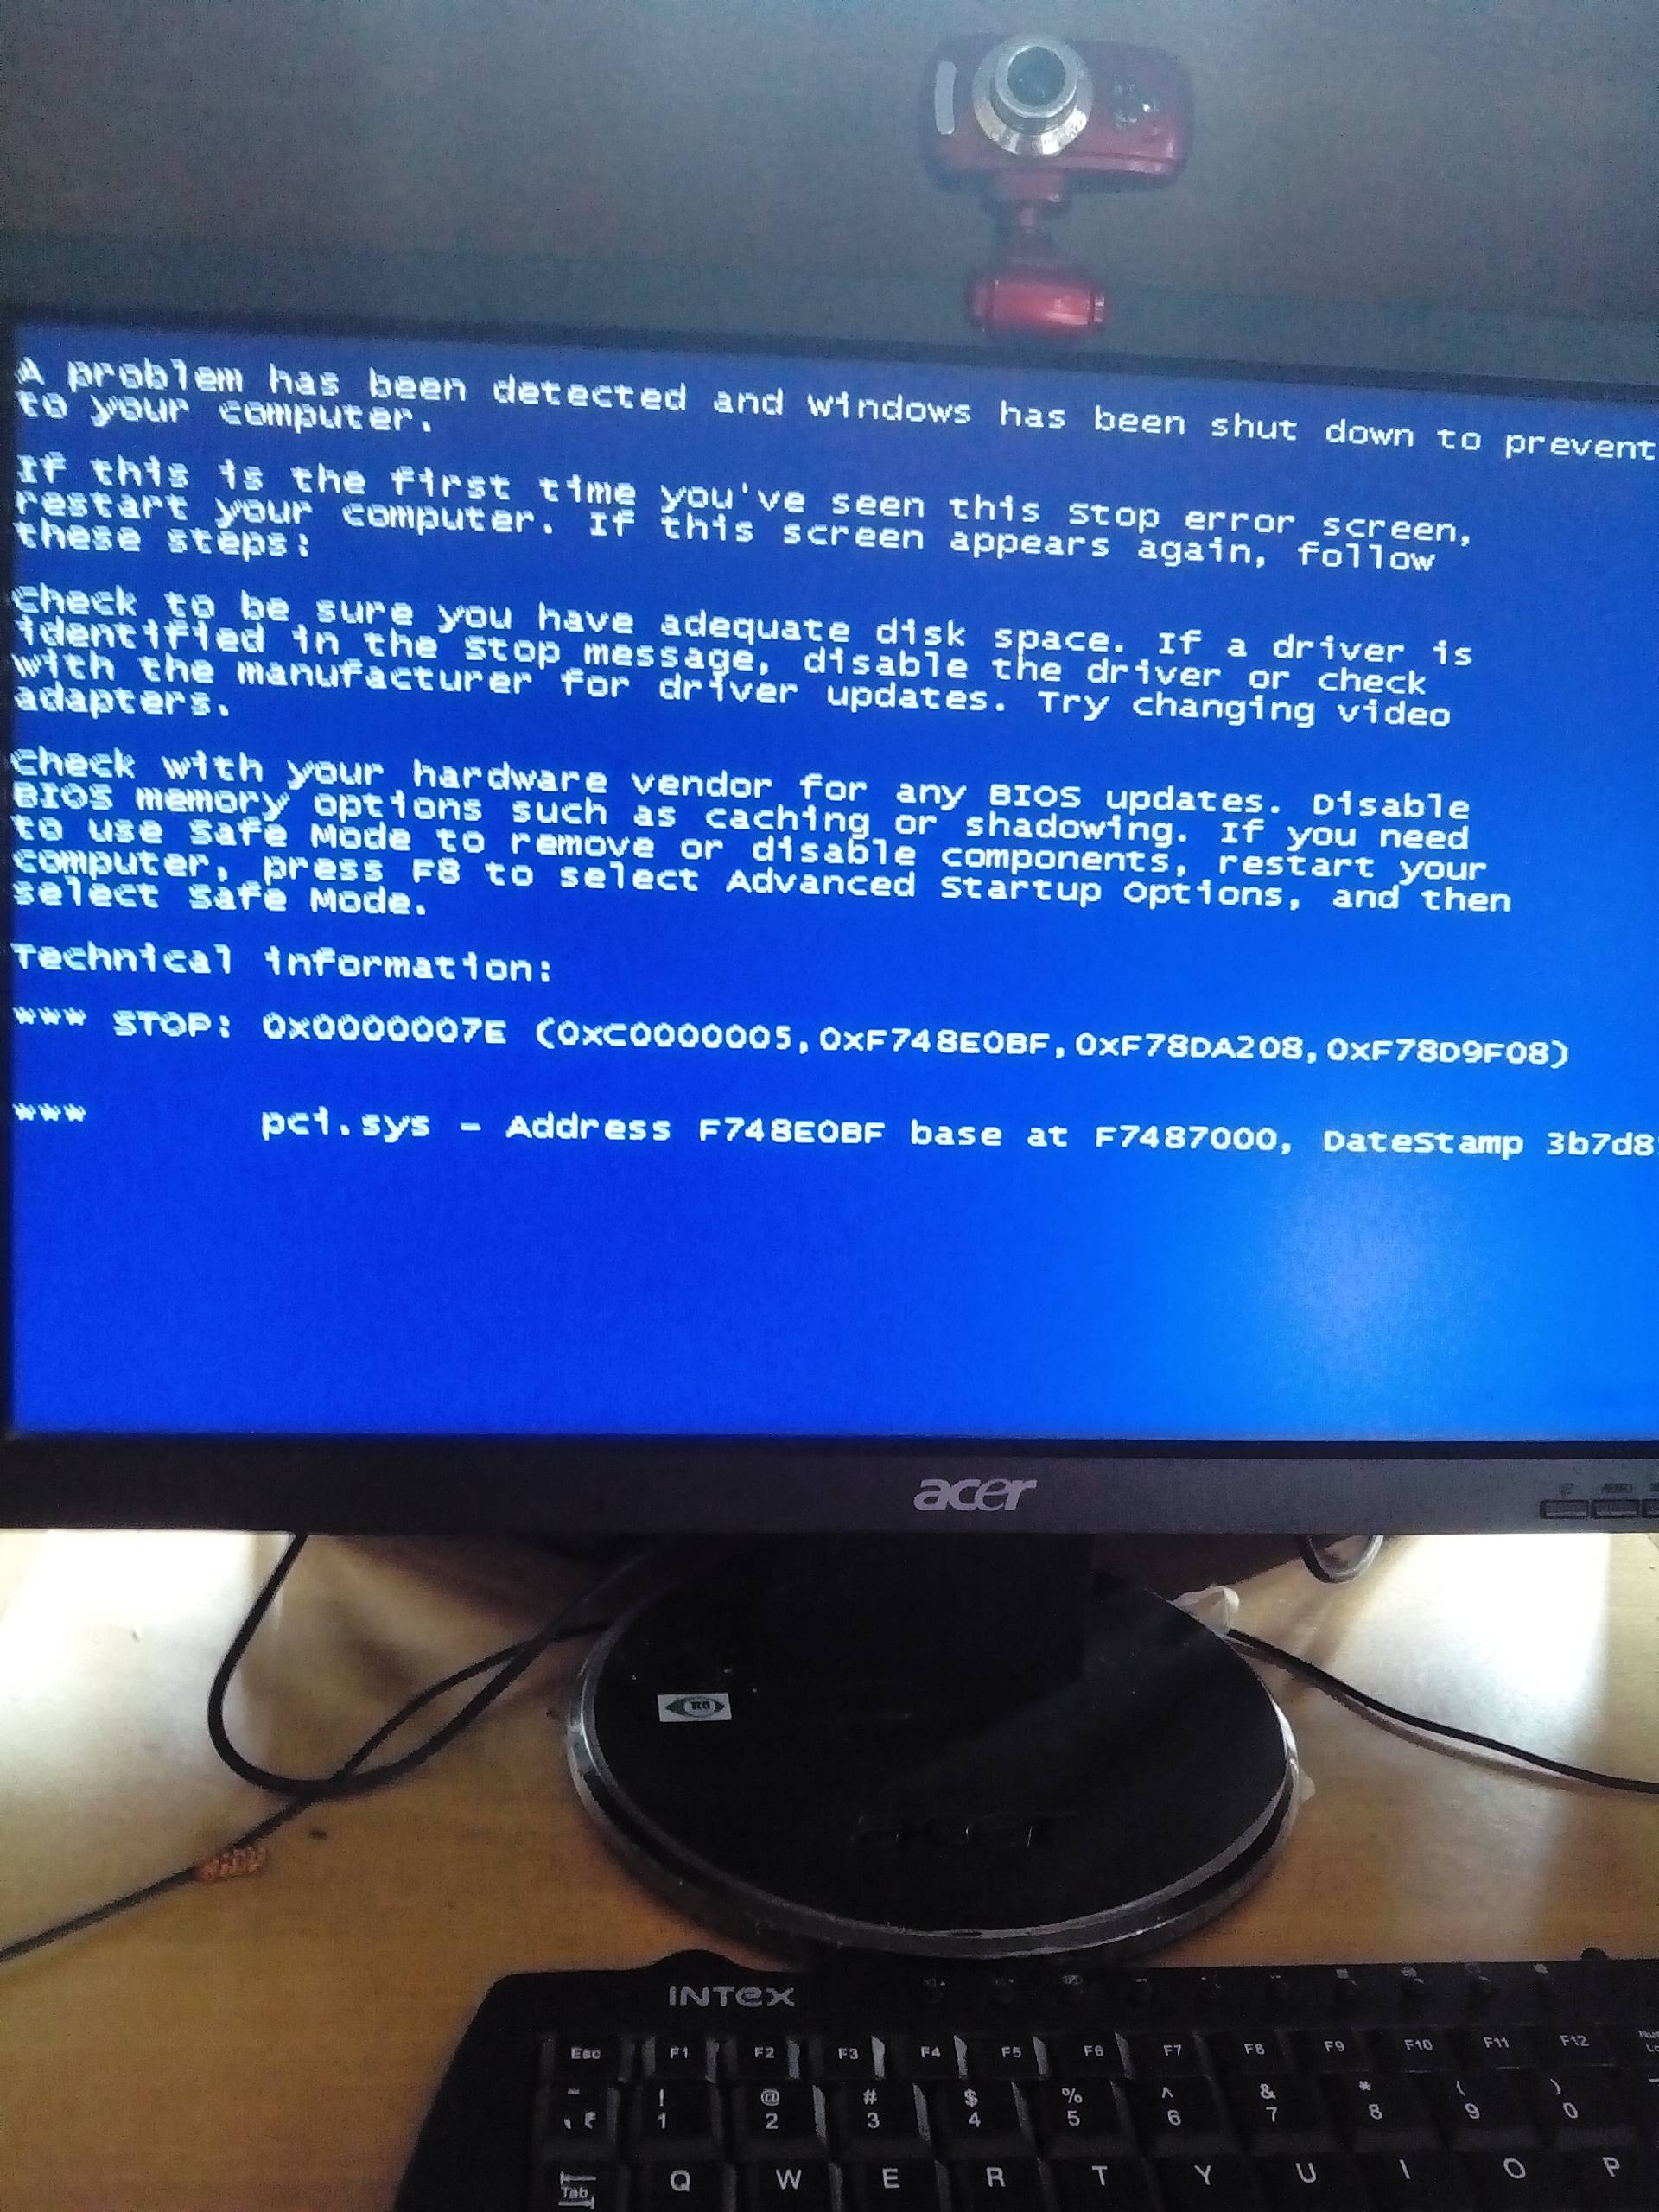 bsod ayant xp pci.sys